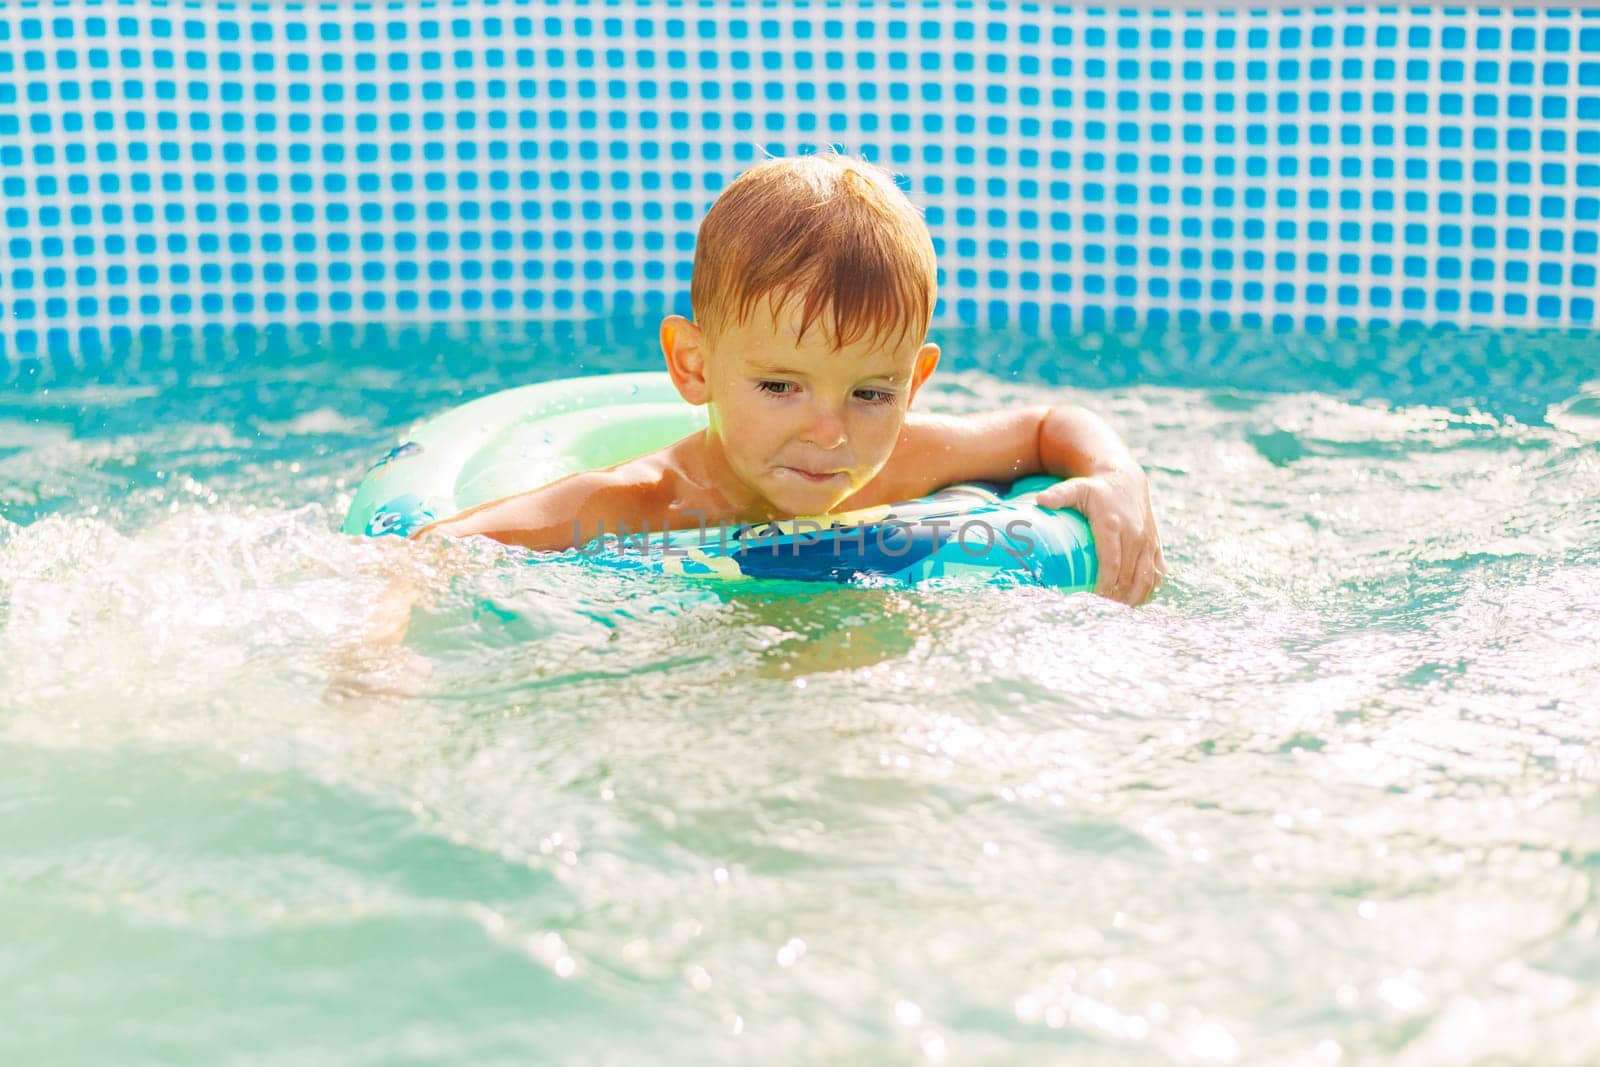 A young boy with a focused expression is learning to swim in a sunny pool using a colorful float ring for safety and support.